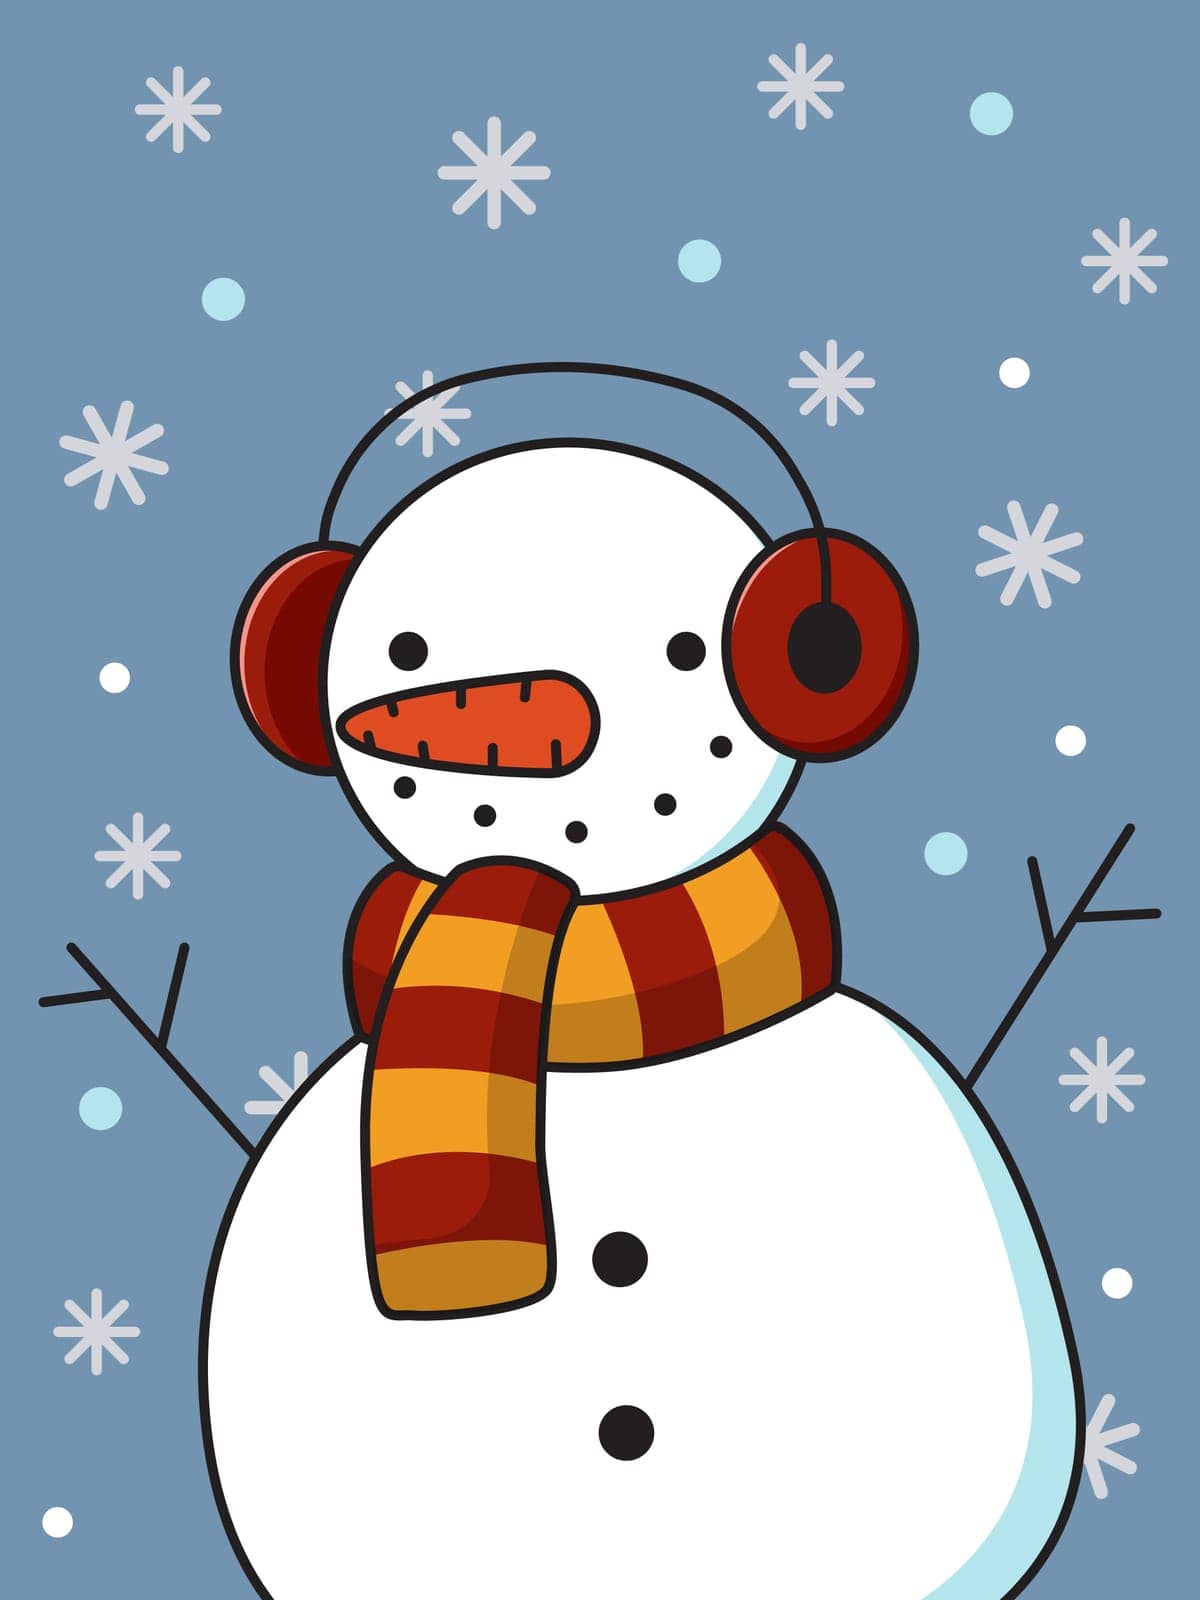 New Year card. Cute snowman on the background of snowflakes. Vector illustration by MeinLieben